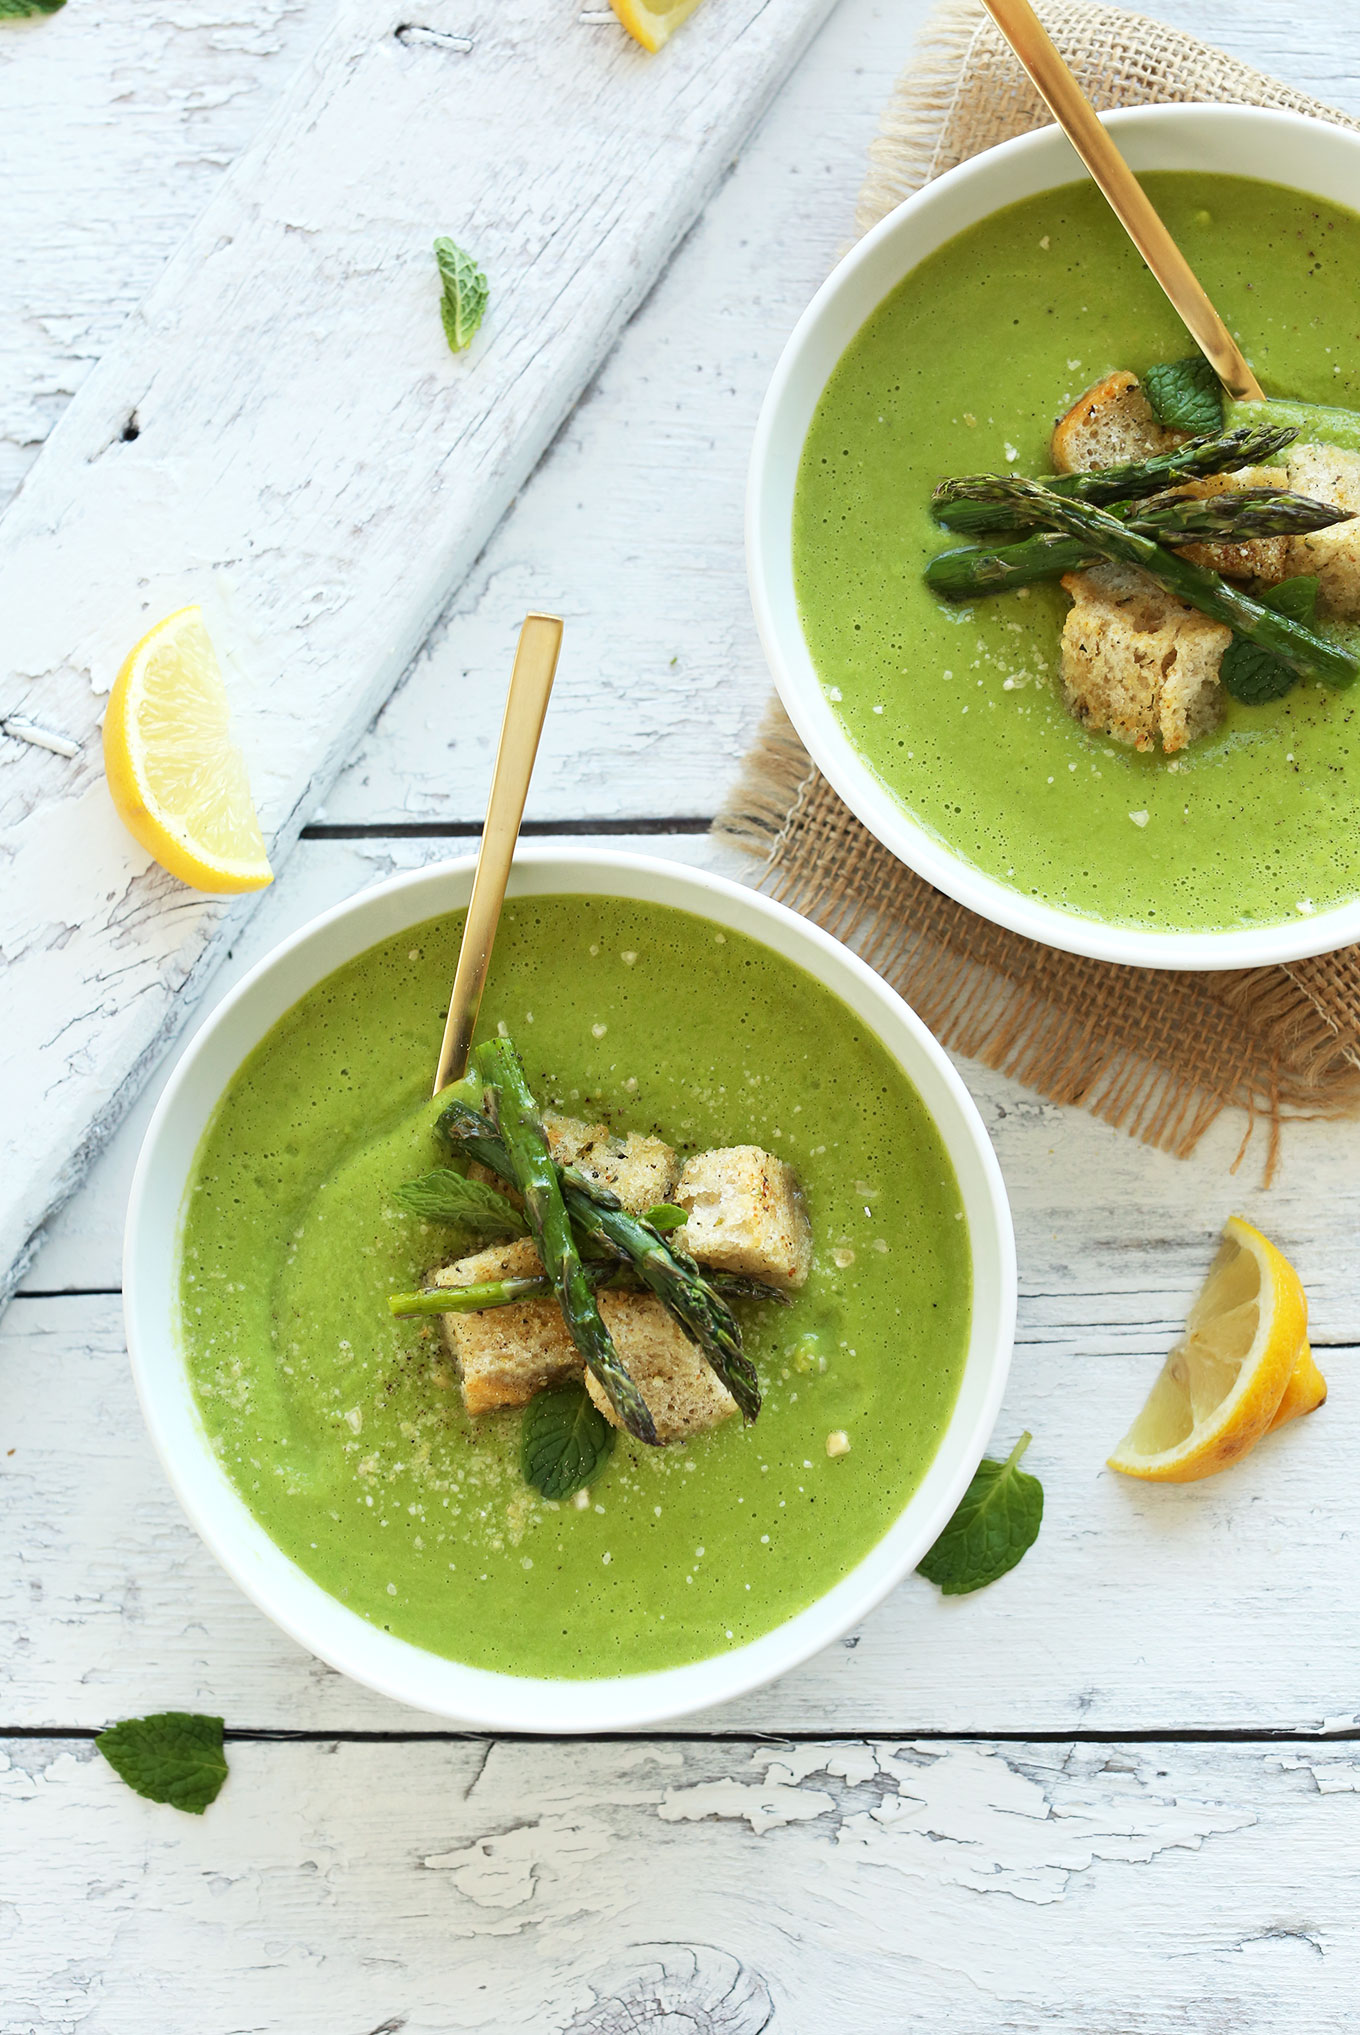 Bowls of homemade Creamy Asparagus and Pea Soup for a quick and healthy vegan dinner